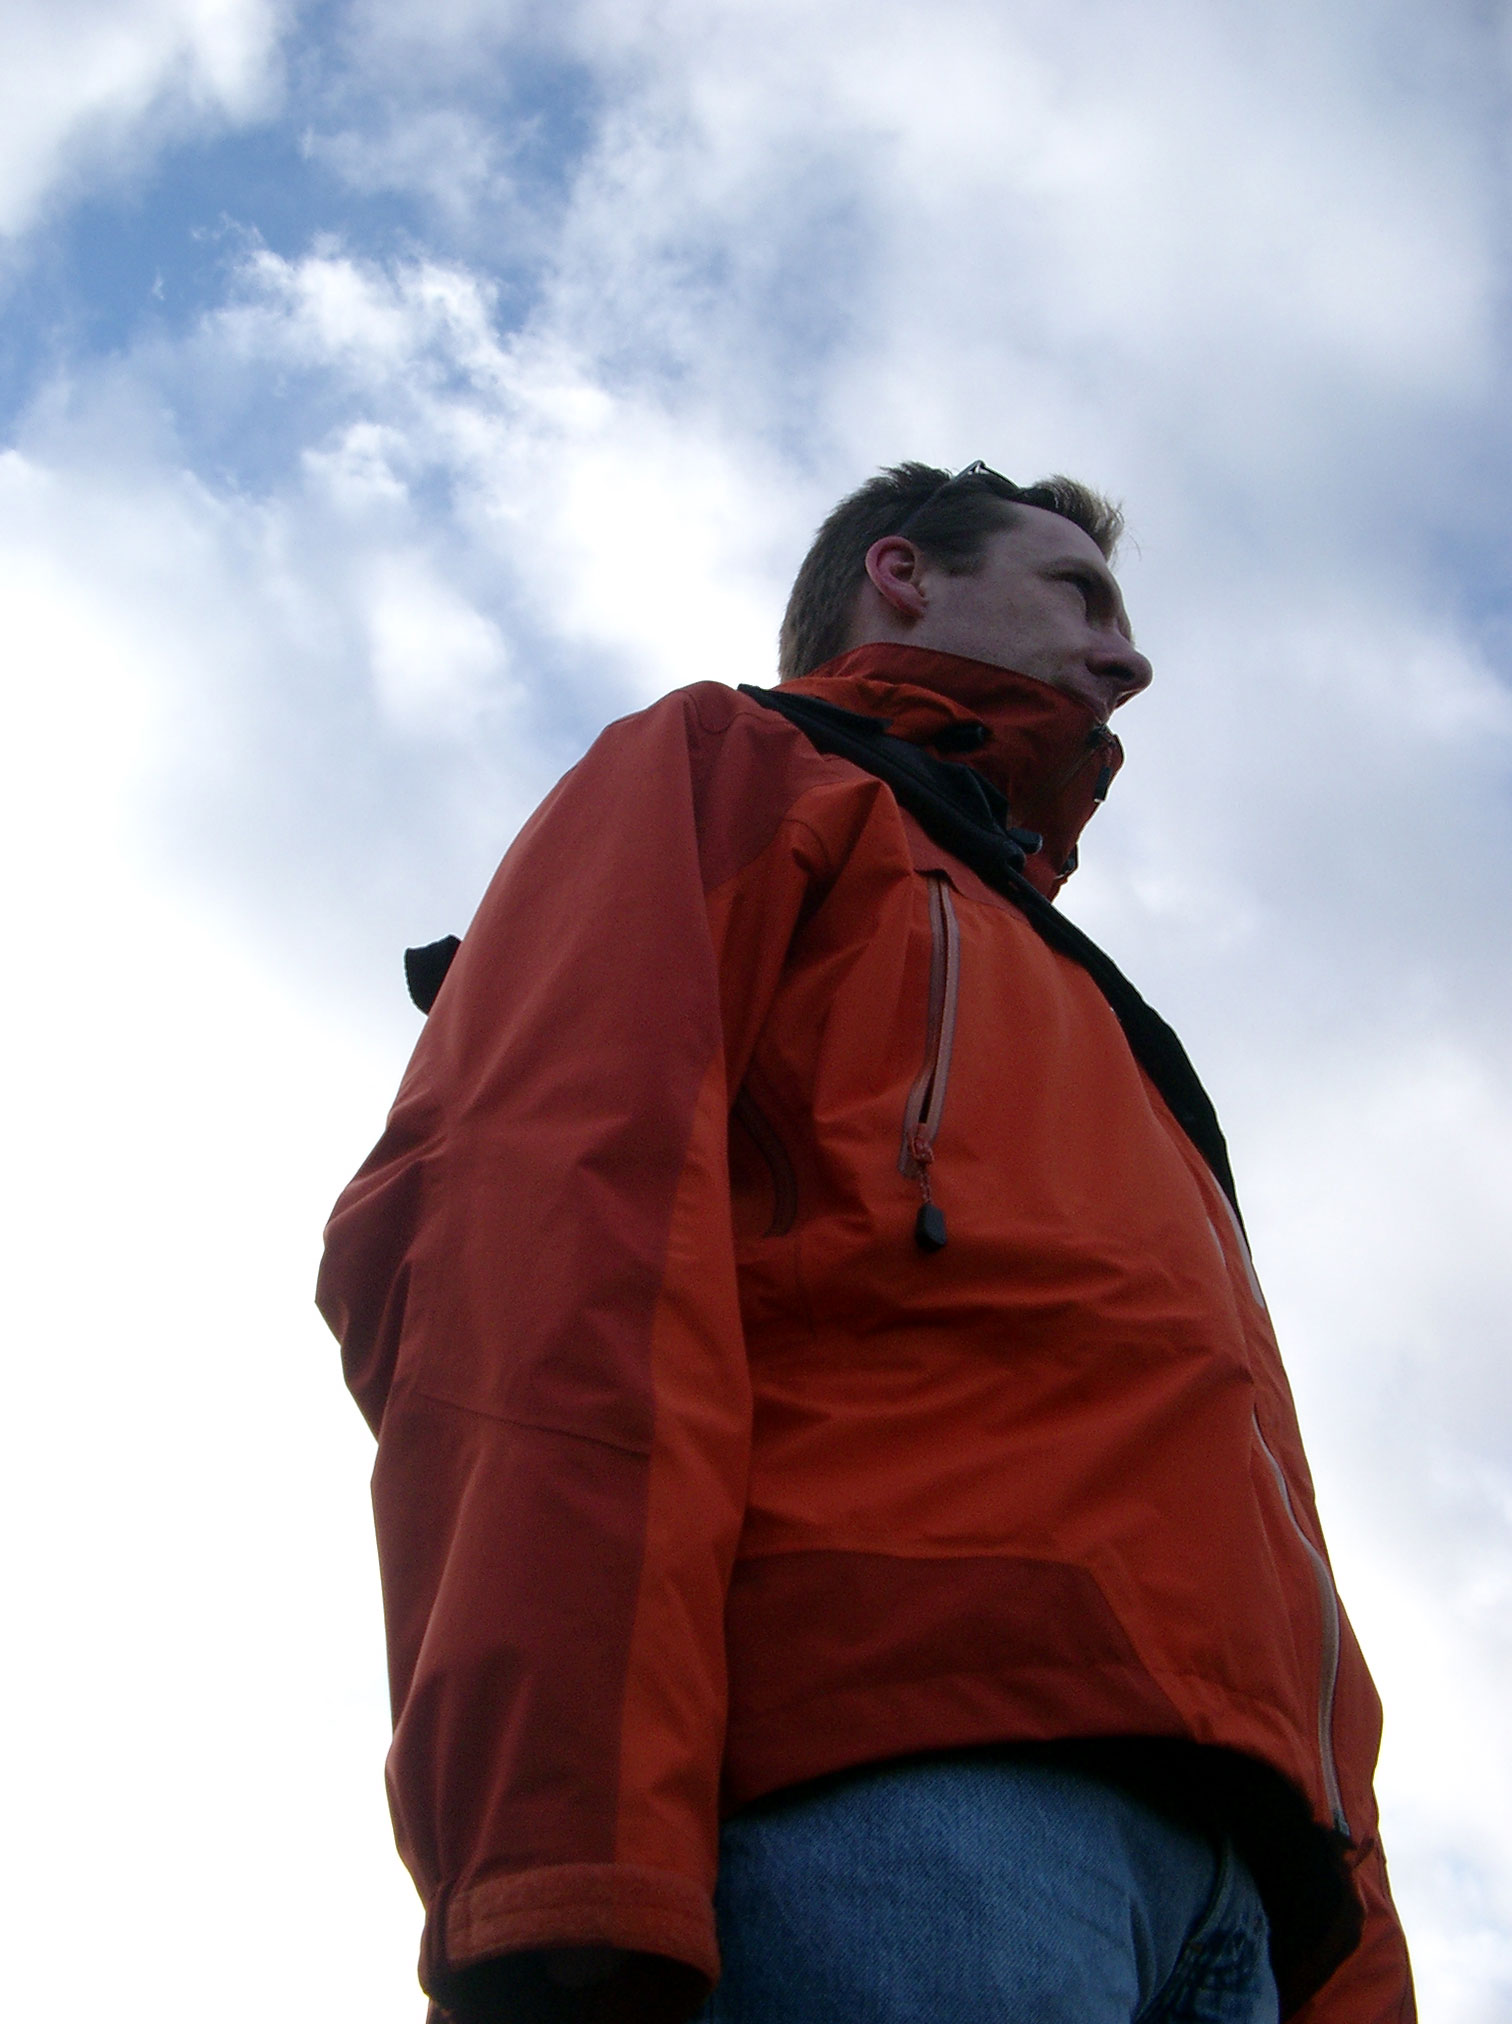 a man in an orange jacket stands against a blue cloudy sky